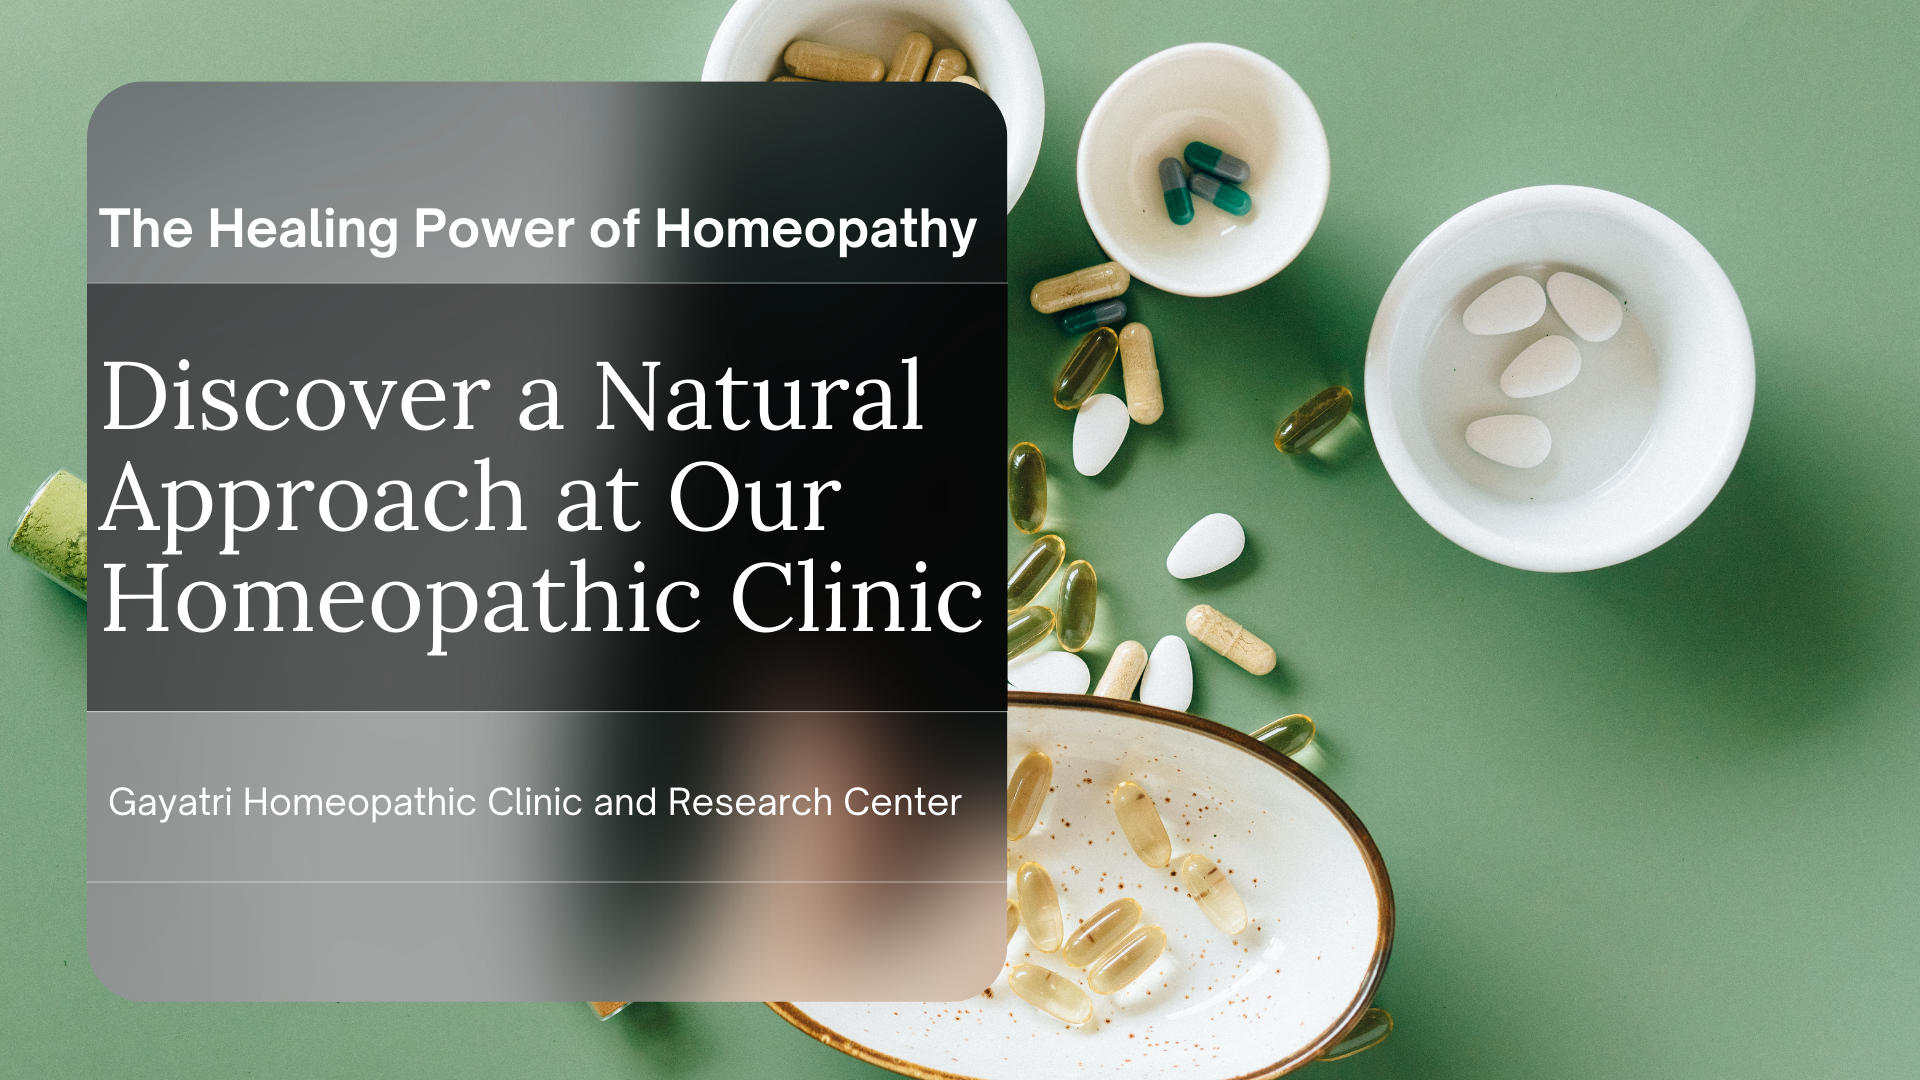 The Healing Power of Homeopathy: Discover a Natural Approach at Our Homeopathic Clinic